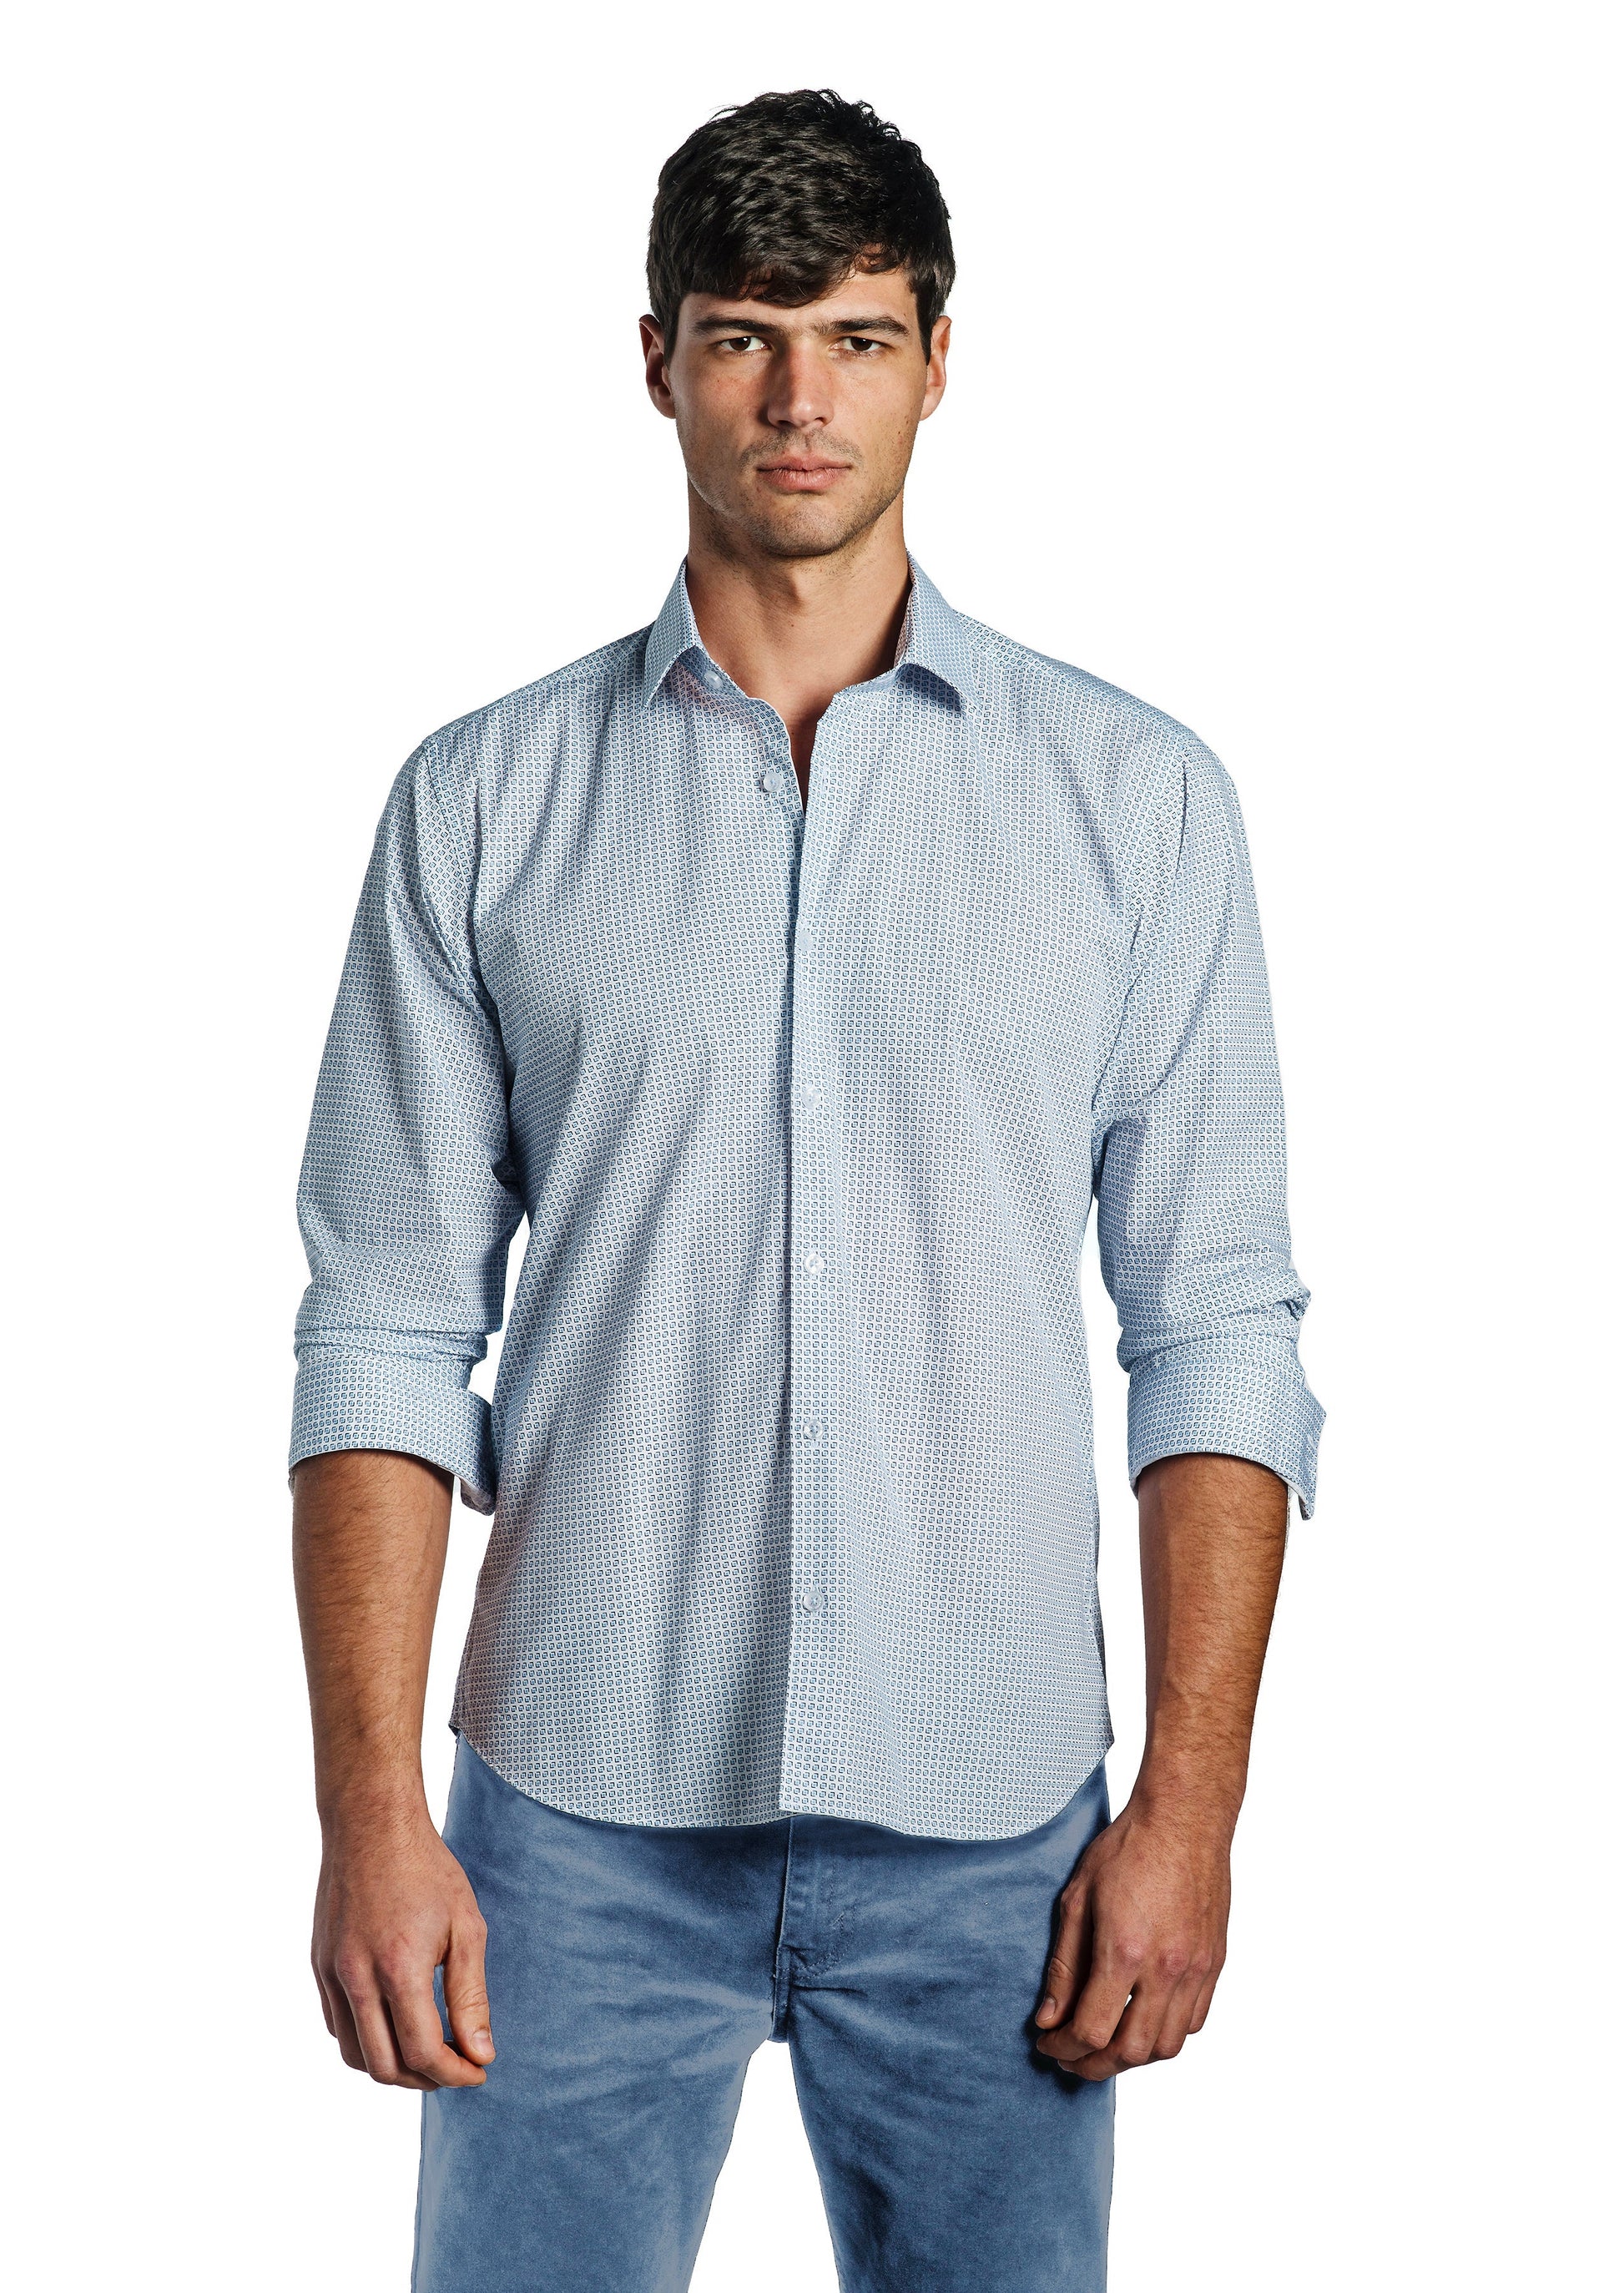 White Long Sleeve Shirt T-6704 Front